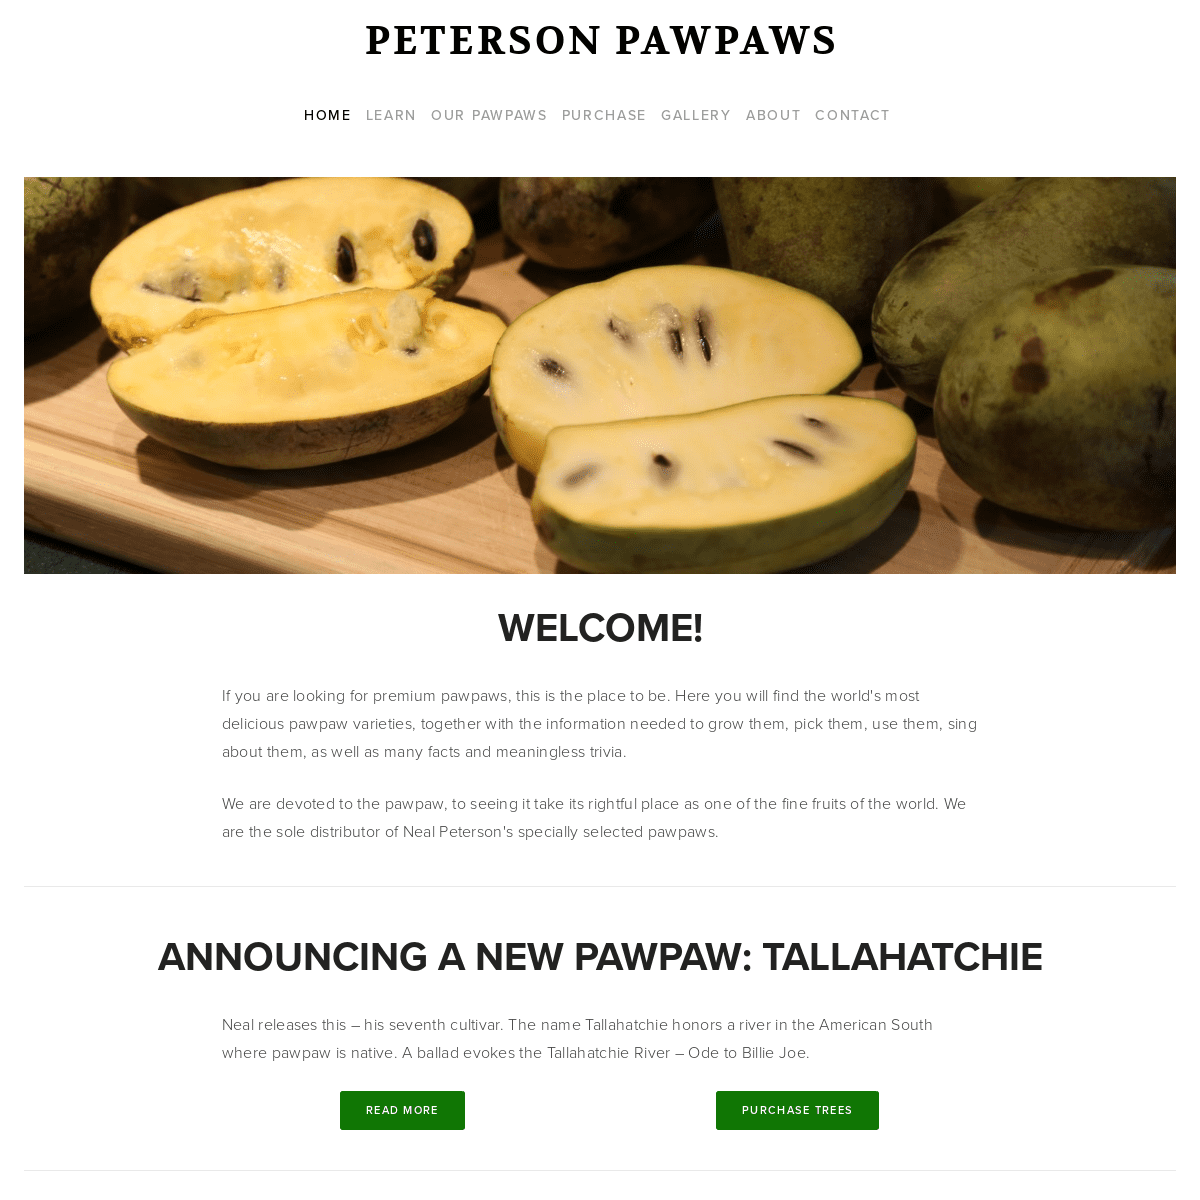 A complete backup of petersonpawpaws.com